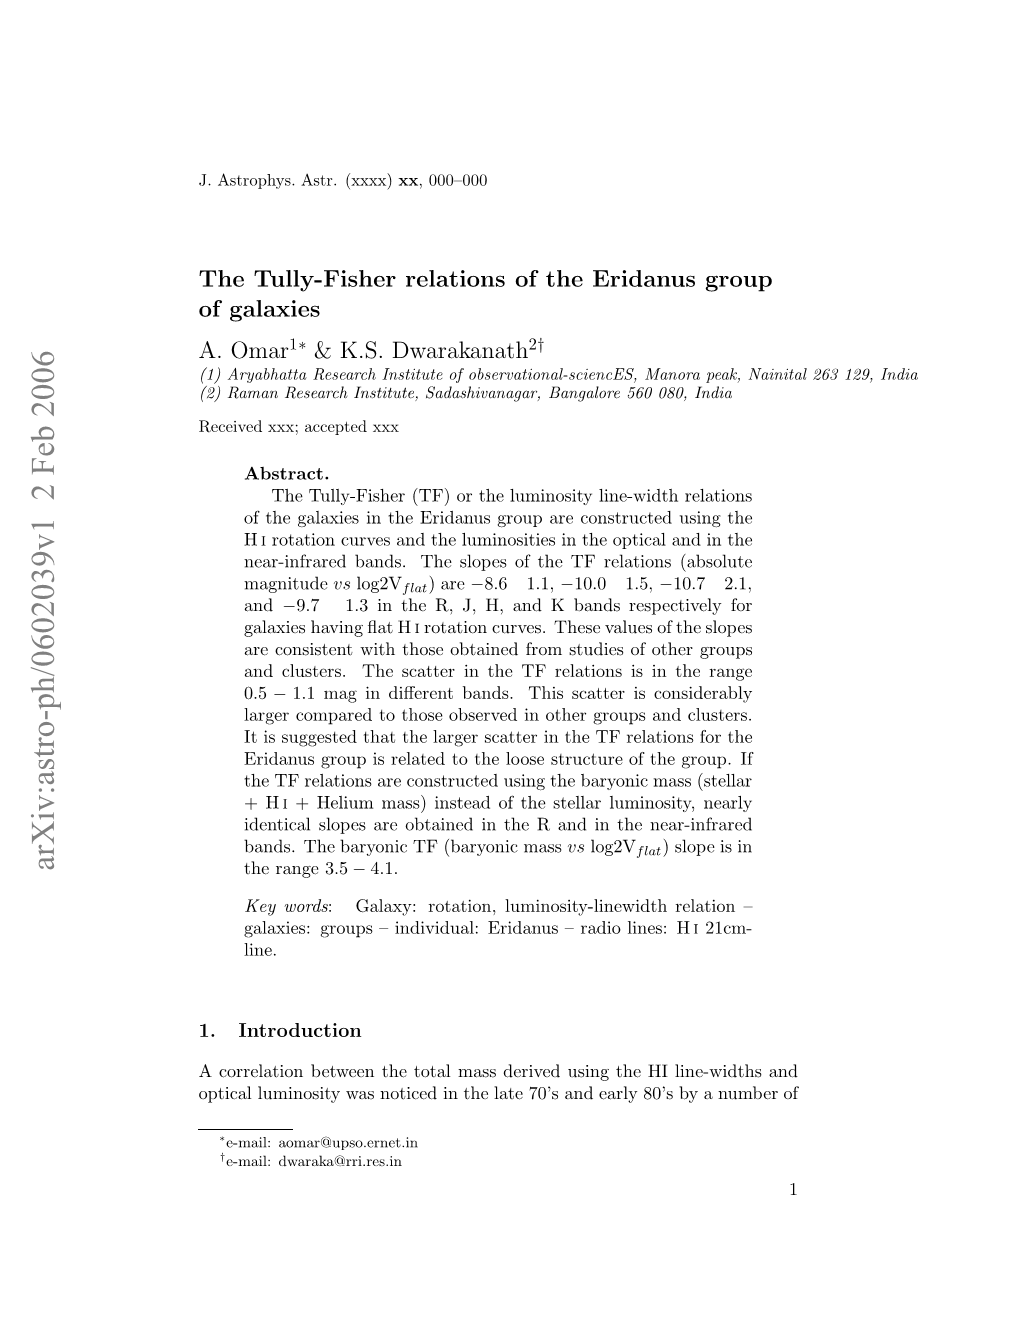 The Tully-Fisher Relations of the Eridanus Group of Galaxies